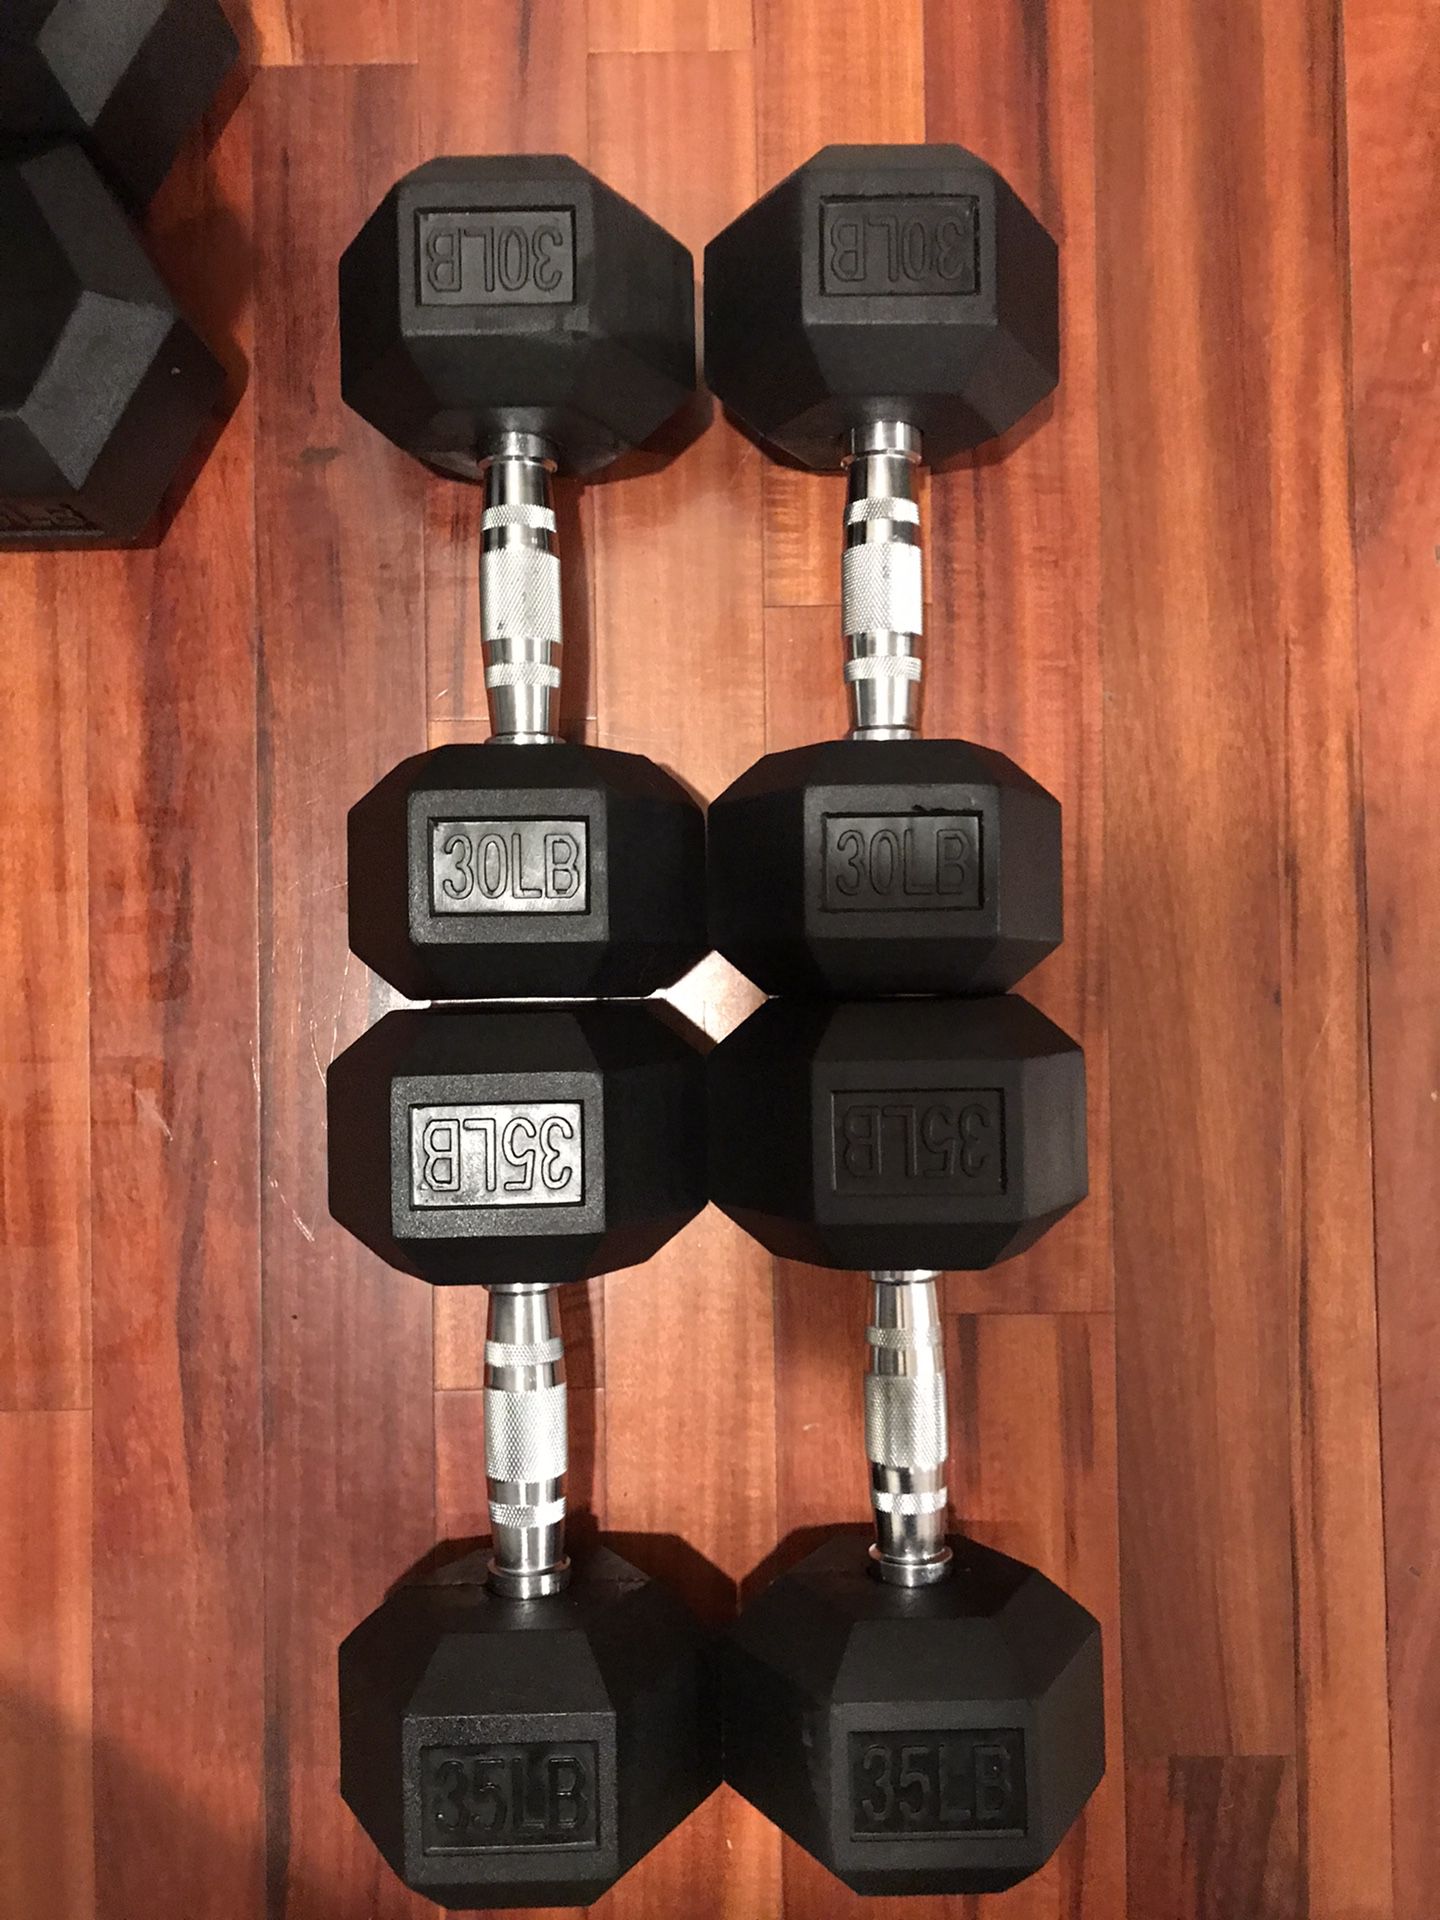 New Rubber Coated Hex Dumbbells (2x30Lbs, 2x35Lbs) for $100 Firm